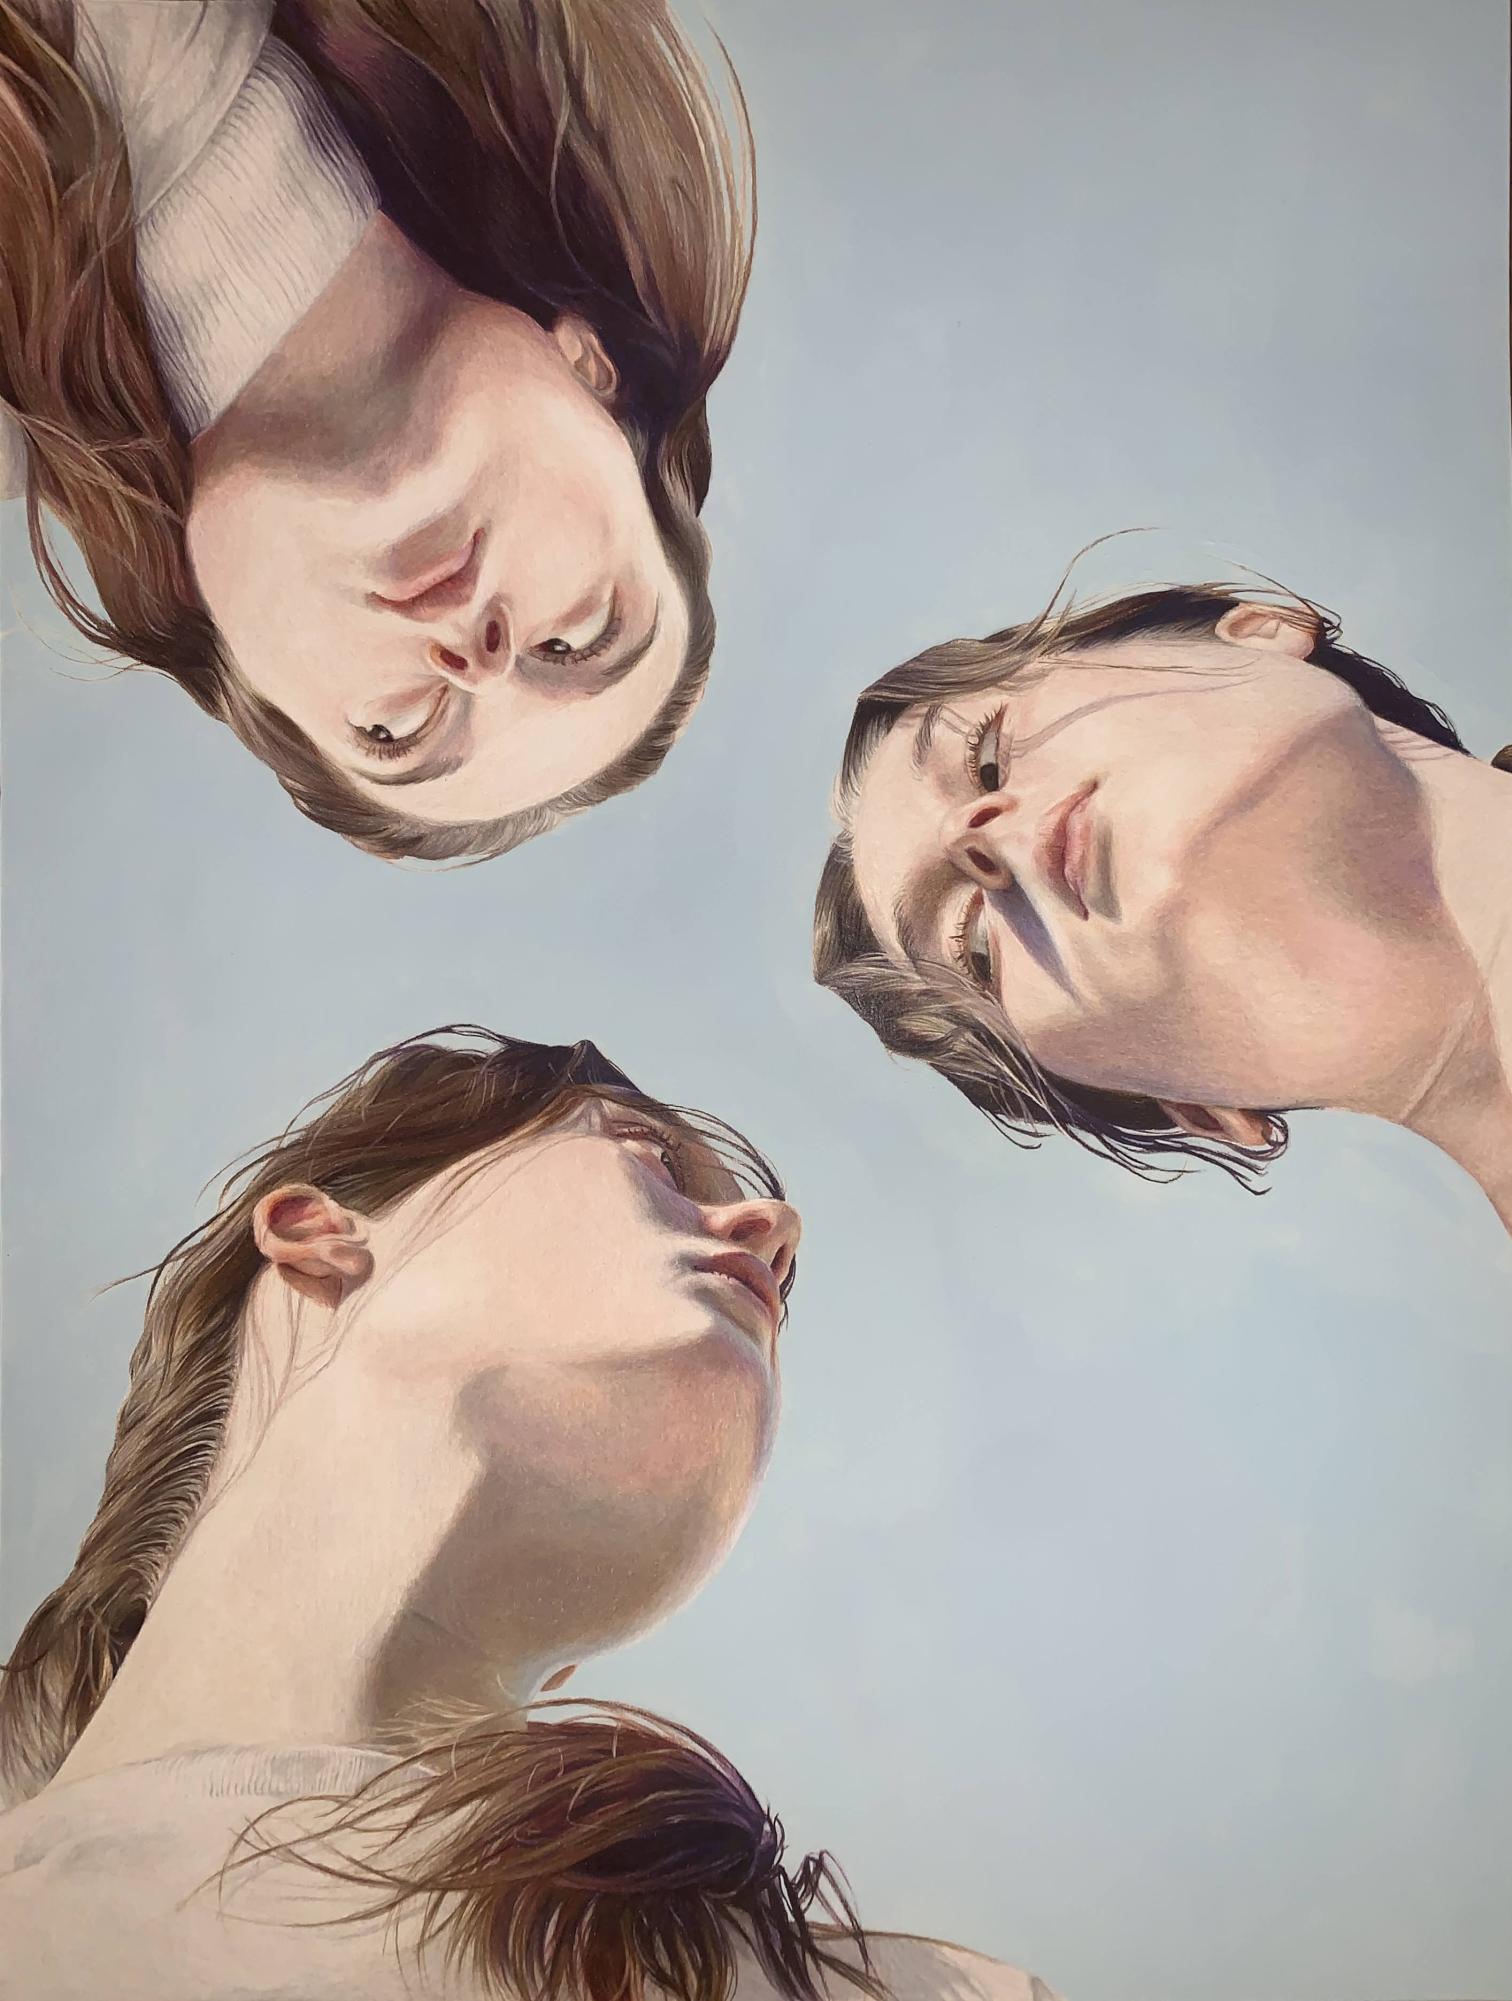 “Introspection” by Reddy is about prioritizing working on yourself. 

“I depicted a group huddle scene between three self portraits to represent this,” Reddy said.

The piece “introspection” is a colored pencil drawing with an acrylic paint background. Reddy used the same shade of blue for the background of many of her pieces because the serene color contrasts with the dramatic themes of the imagery. 

“I am really happy with how the soft colors came together for this piece,” Reddy said.

Caption by Mira Patel.